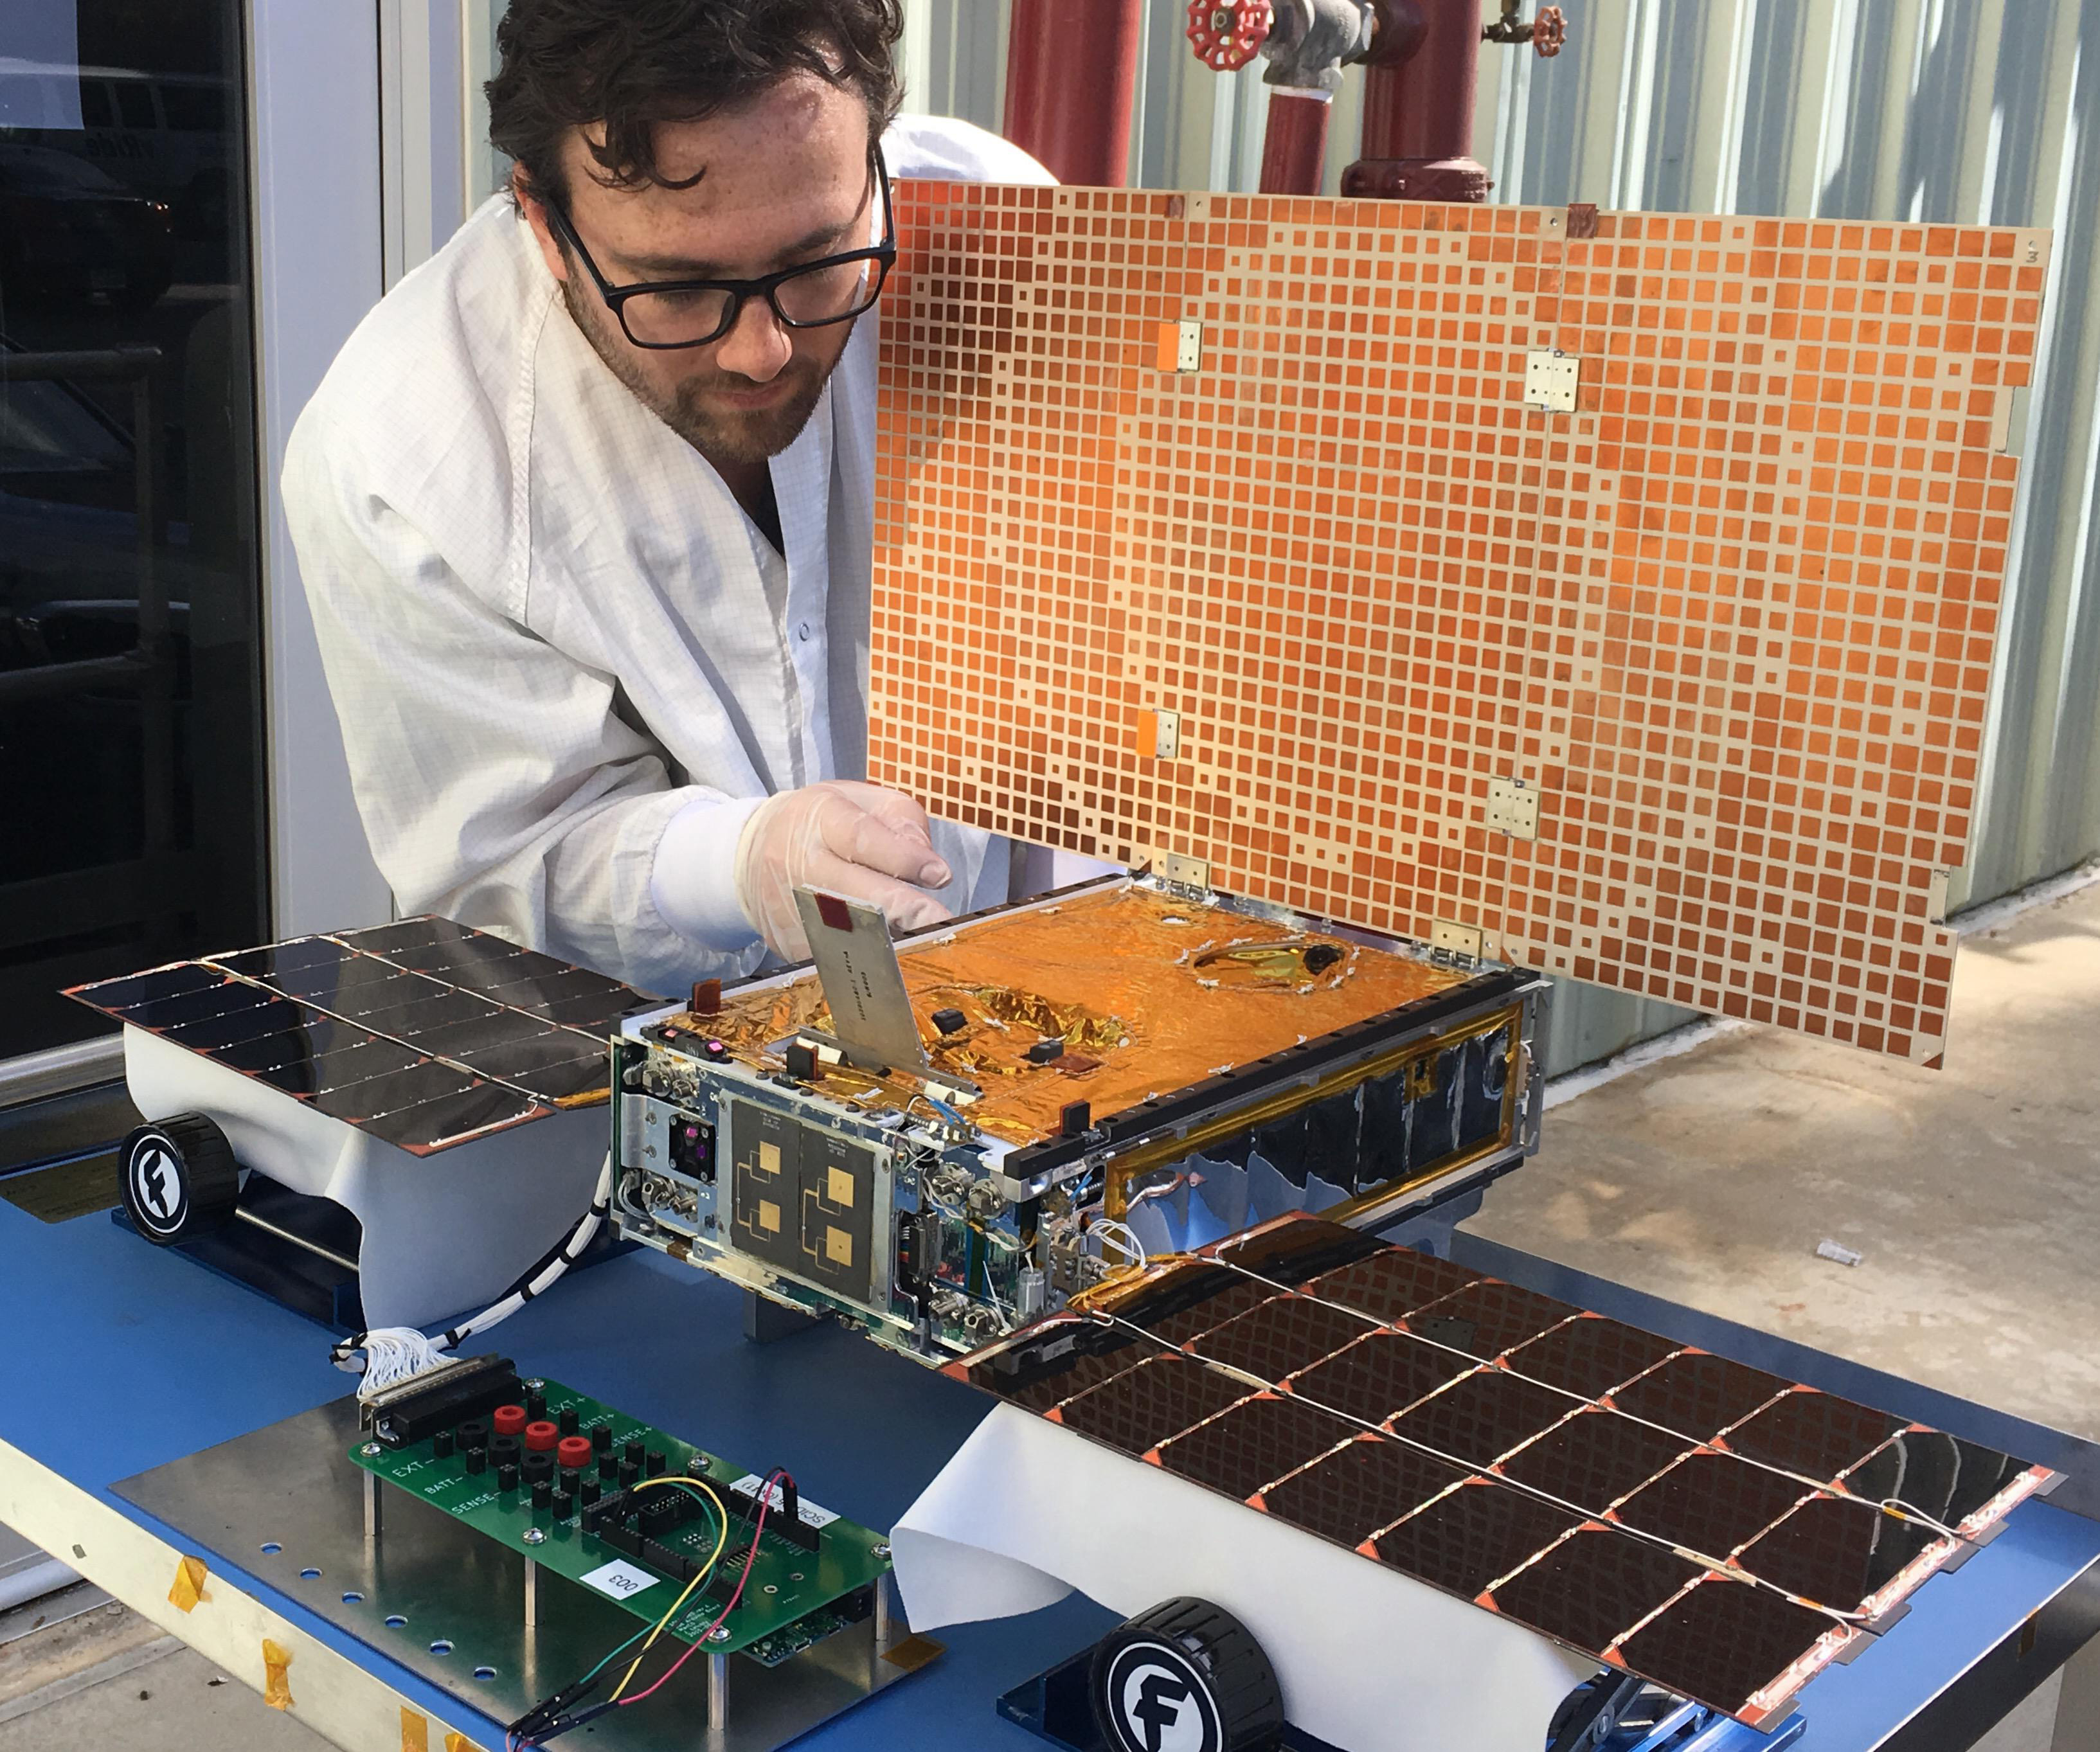 In this undated photo made available by NASA on March 29, 2018, engineer Joel Steinkraus uses sunlight to test the solar arrays on one of the Mars Cube One (MarCO) spacecraft at NASA's Jet Propulsion Laboratory in Pasadena, Calif. The MarCOs will be the first CubeSats - a kind of modular, mini-satellite - flown into deep space. They're designed to fly along behind NASA's InSight lander on its cruise to Mars. (NASA/JPL-Caltech via AP)